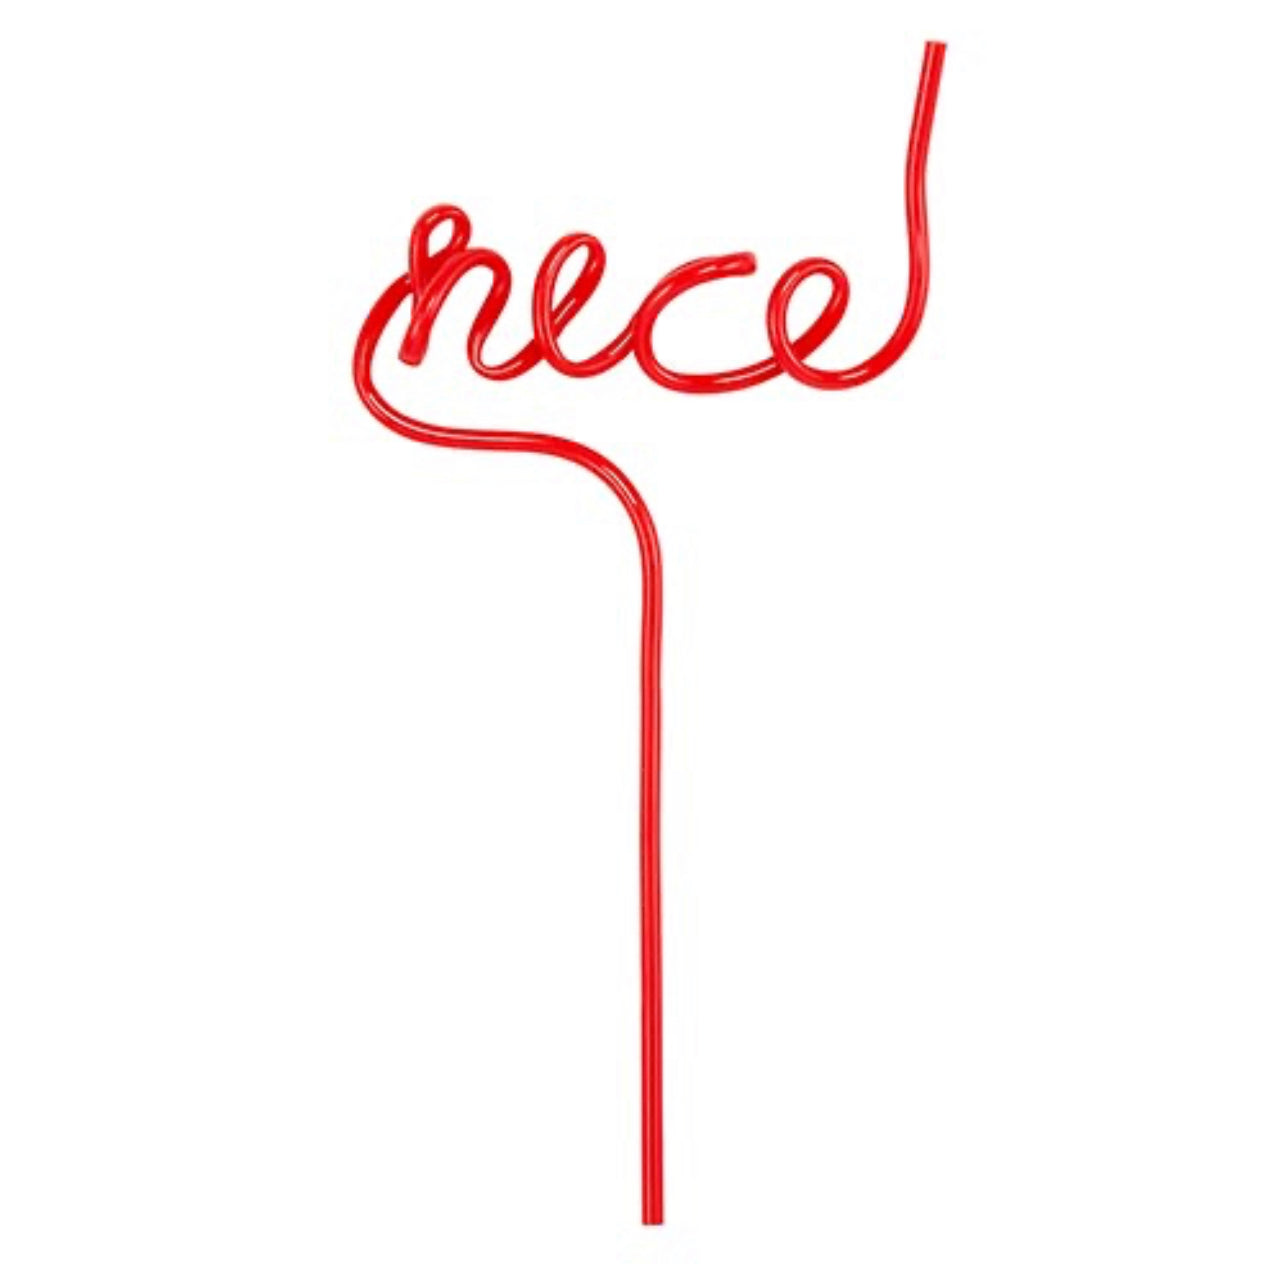 red straw for christmas drinks that spells out the word "nice" at the top